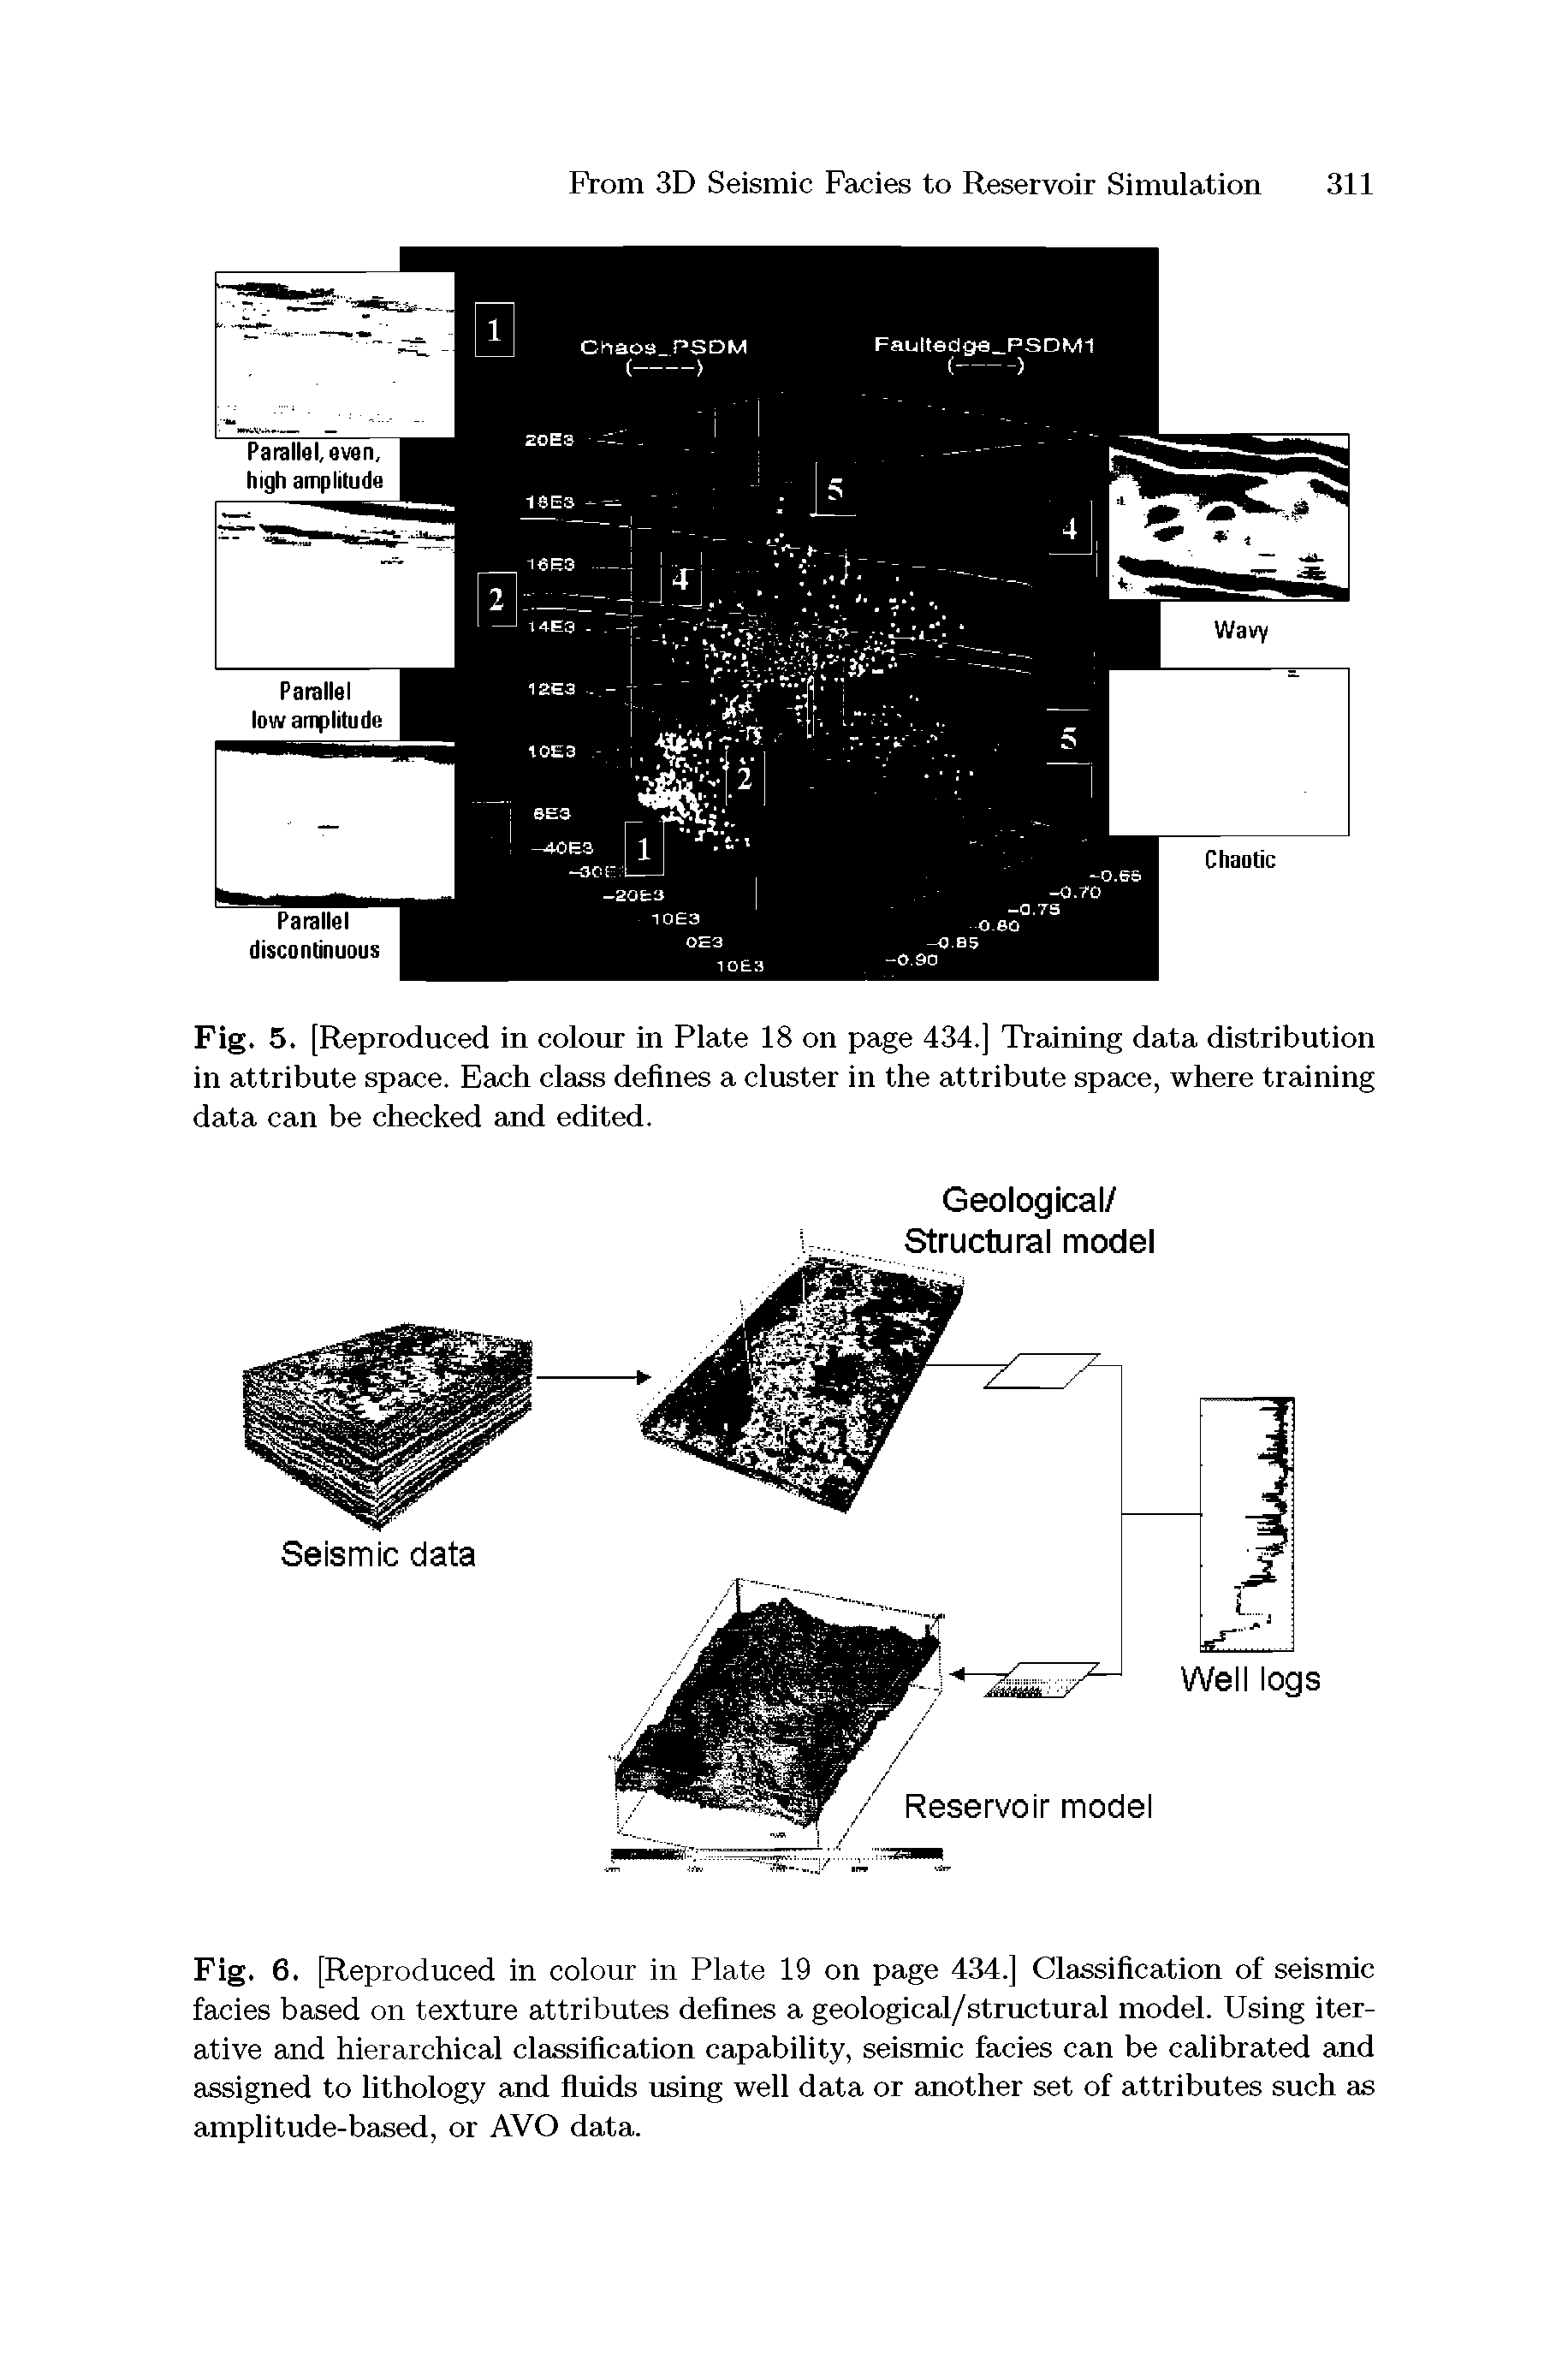 Fig. 6. [Reproduced in colonr in Plate 19 on page 434.] Classification of seismic facies based on texture attributes defines a geological/structural model. Using iterative and hierarchical classification capability, seismic facies can be calibrated and assigned to Uthology and fluids using well data or another set of attributes such as amplitude-based, or AVO data.